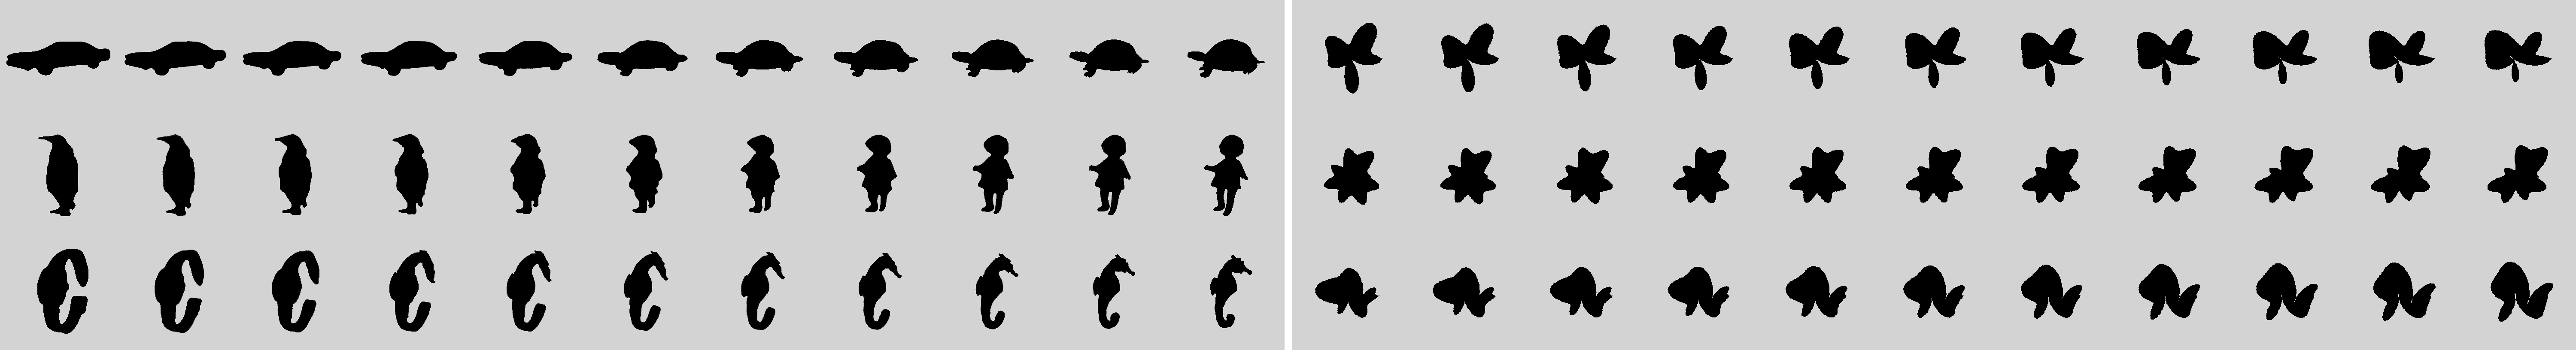 The three identifiable (i.e., car-tortoise, penguin-child, watch-seahorse) and three non-identifiable morph series used in the experiment.